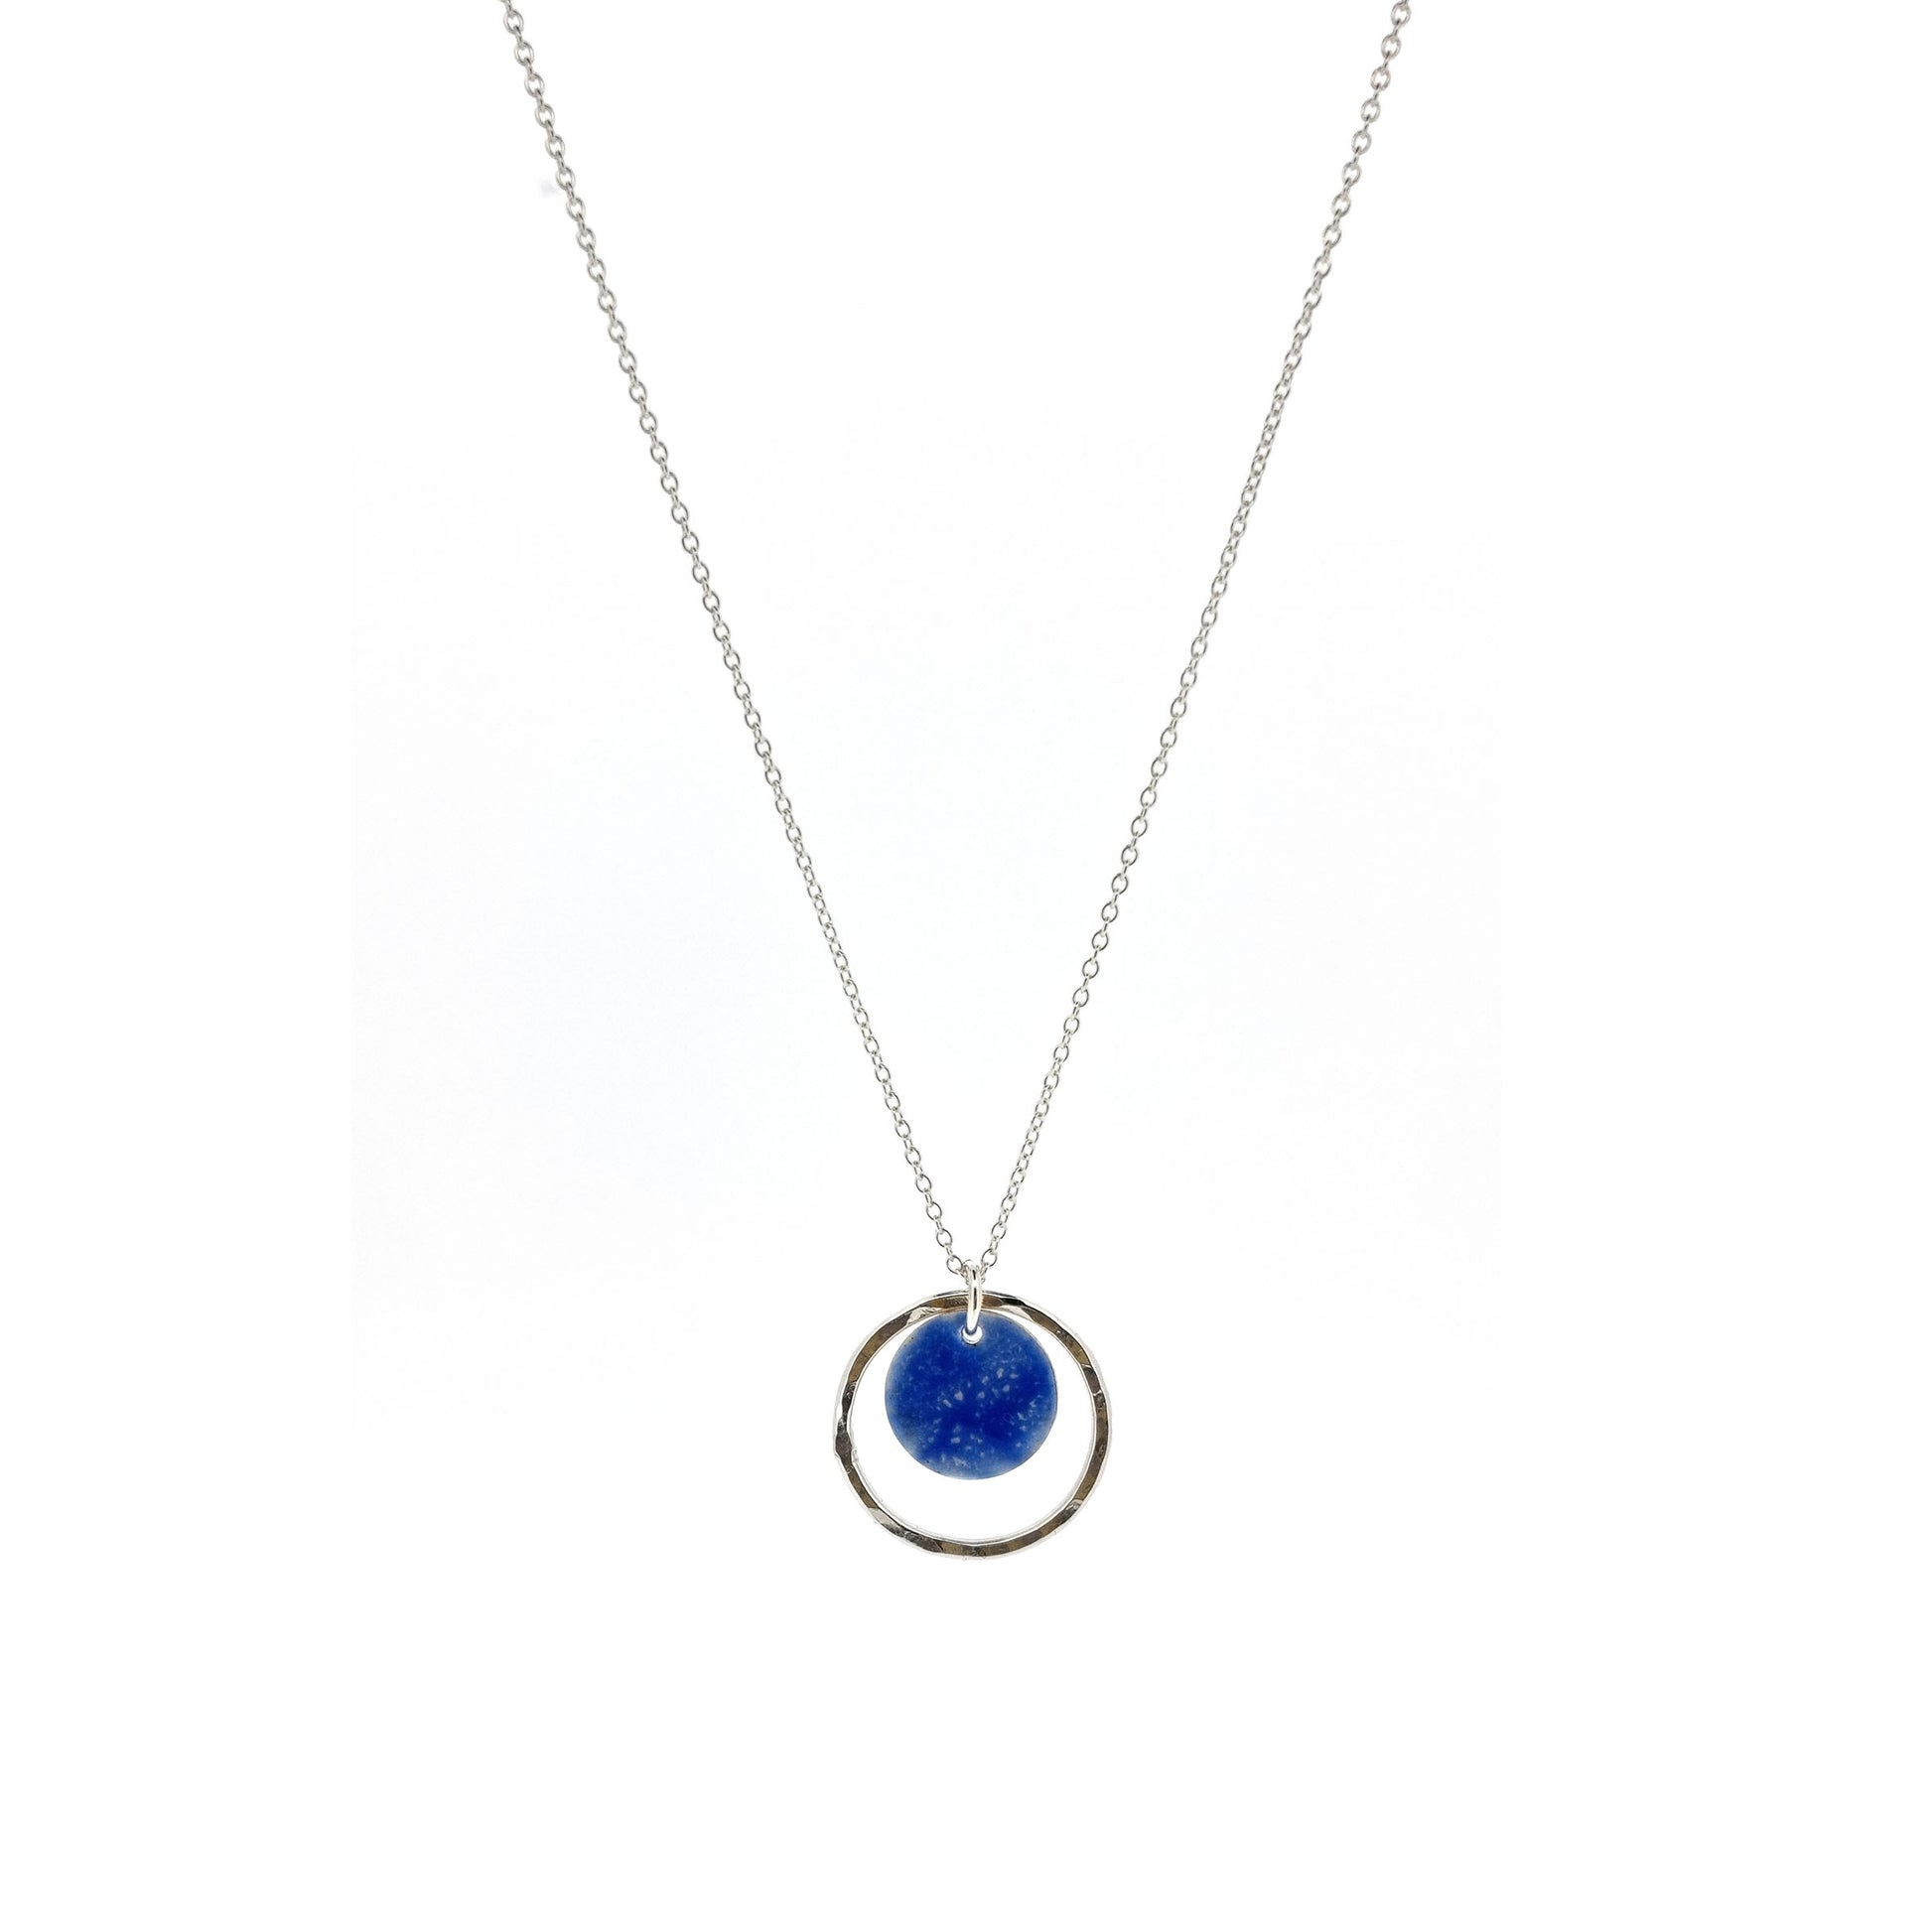 A silver pendant with a central disc with a blue patterned enamel surrounded by a silver hammered open circle. On a silver chain.